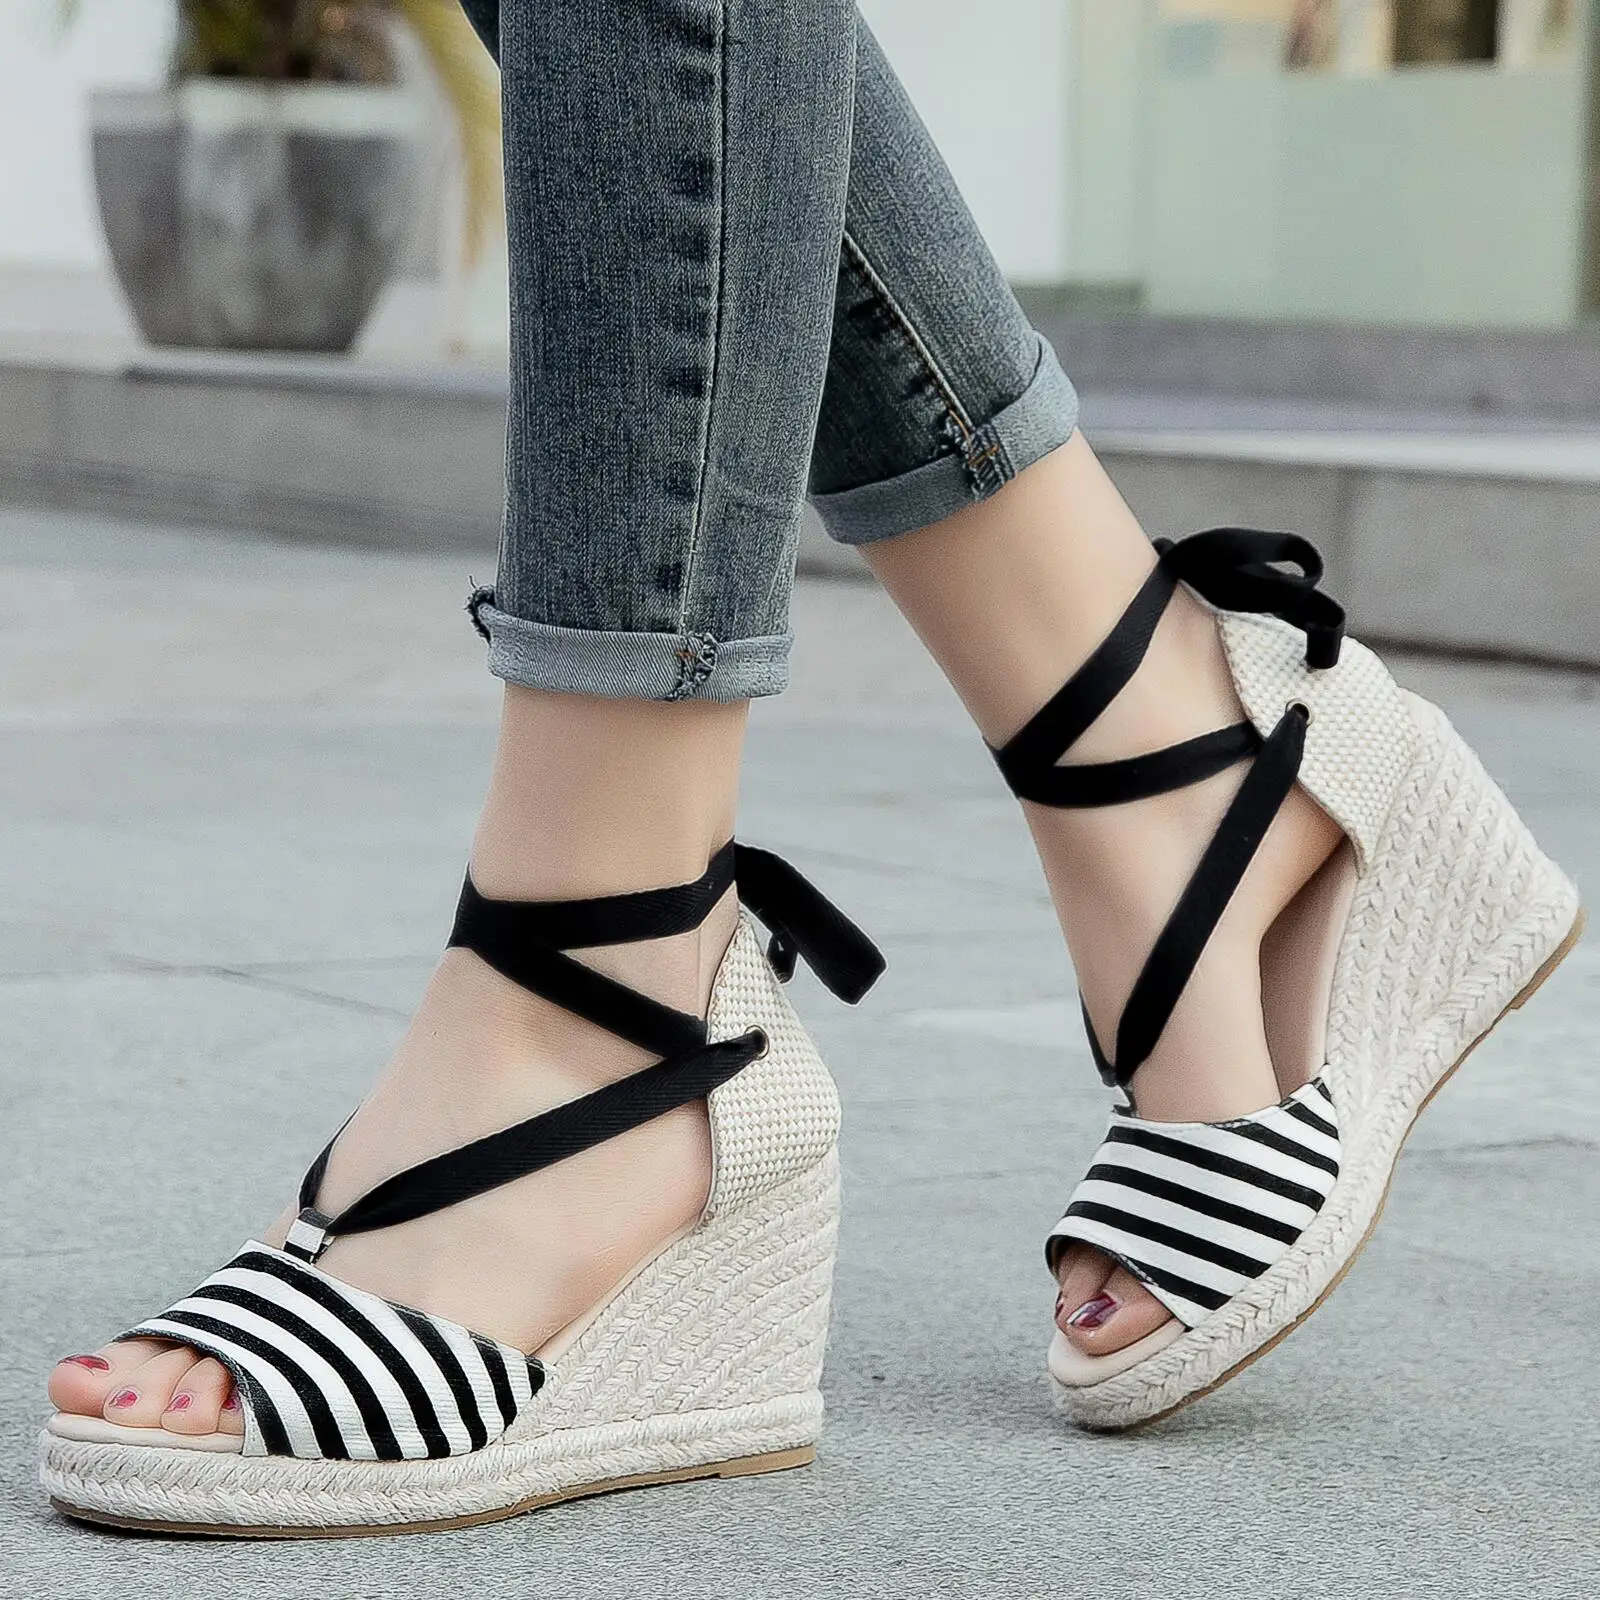 

Espadrille Wedge Sandals for Women - Comfortable and Breathable Womens Wedges, Lace Up Fish Mouth Wedge Shoes, Can Be Worn with